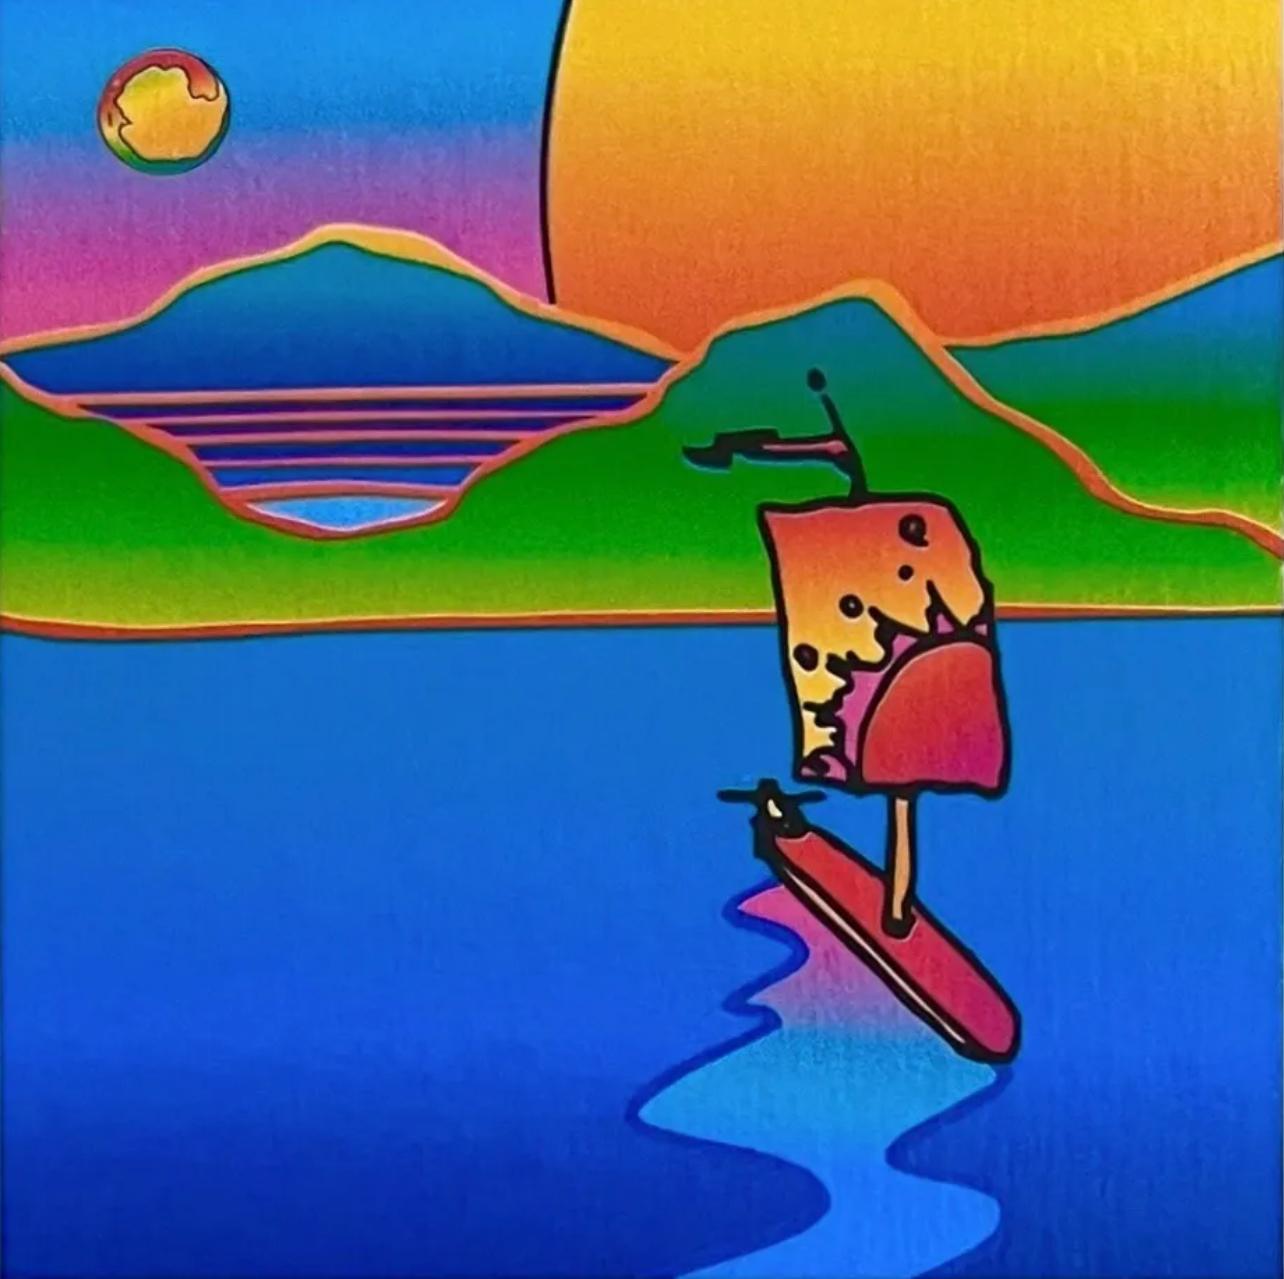 Artist: Peter Max (1937)
Title: Sailboat with Sun & Moon
Year: 2003
Edition: 455/500, plus proofs
Medium: Lithograph on Lustro Saxony paper
Size: 3.43 x 2.62 inches
Condition: Excellent
Inscription: Signed and numbered by the artist.
Notes: